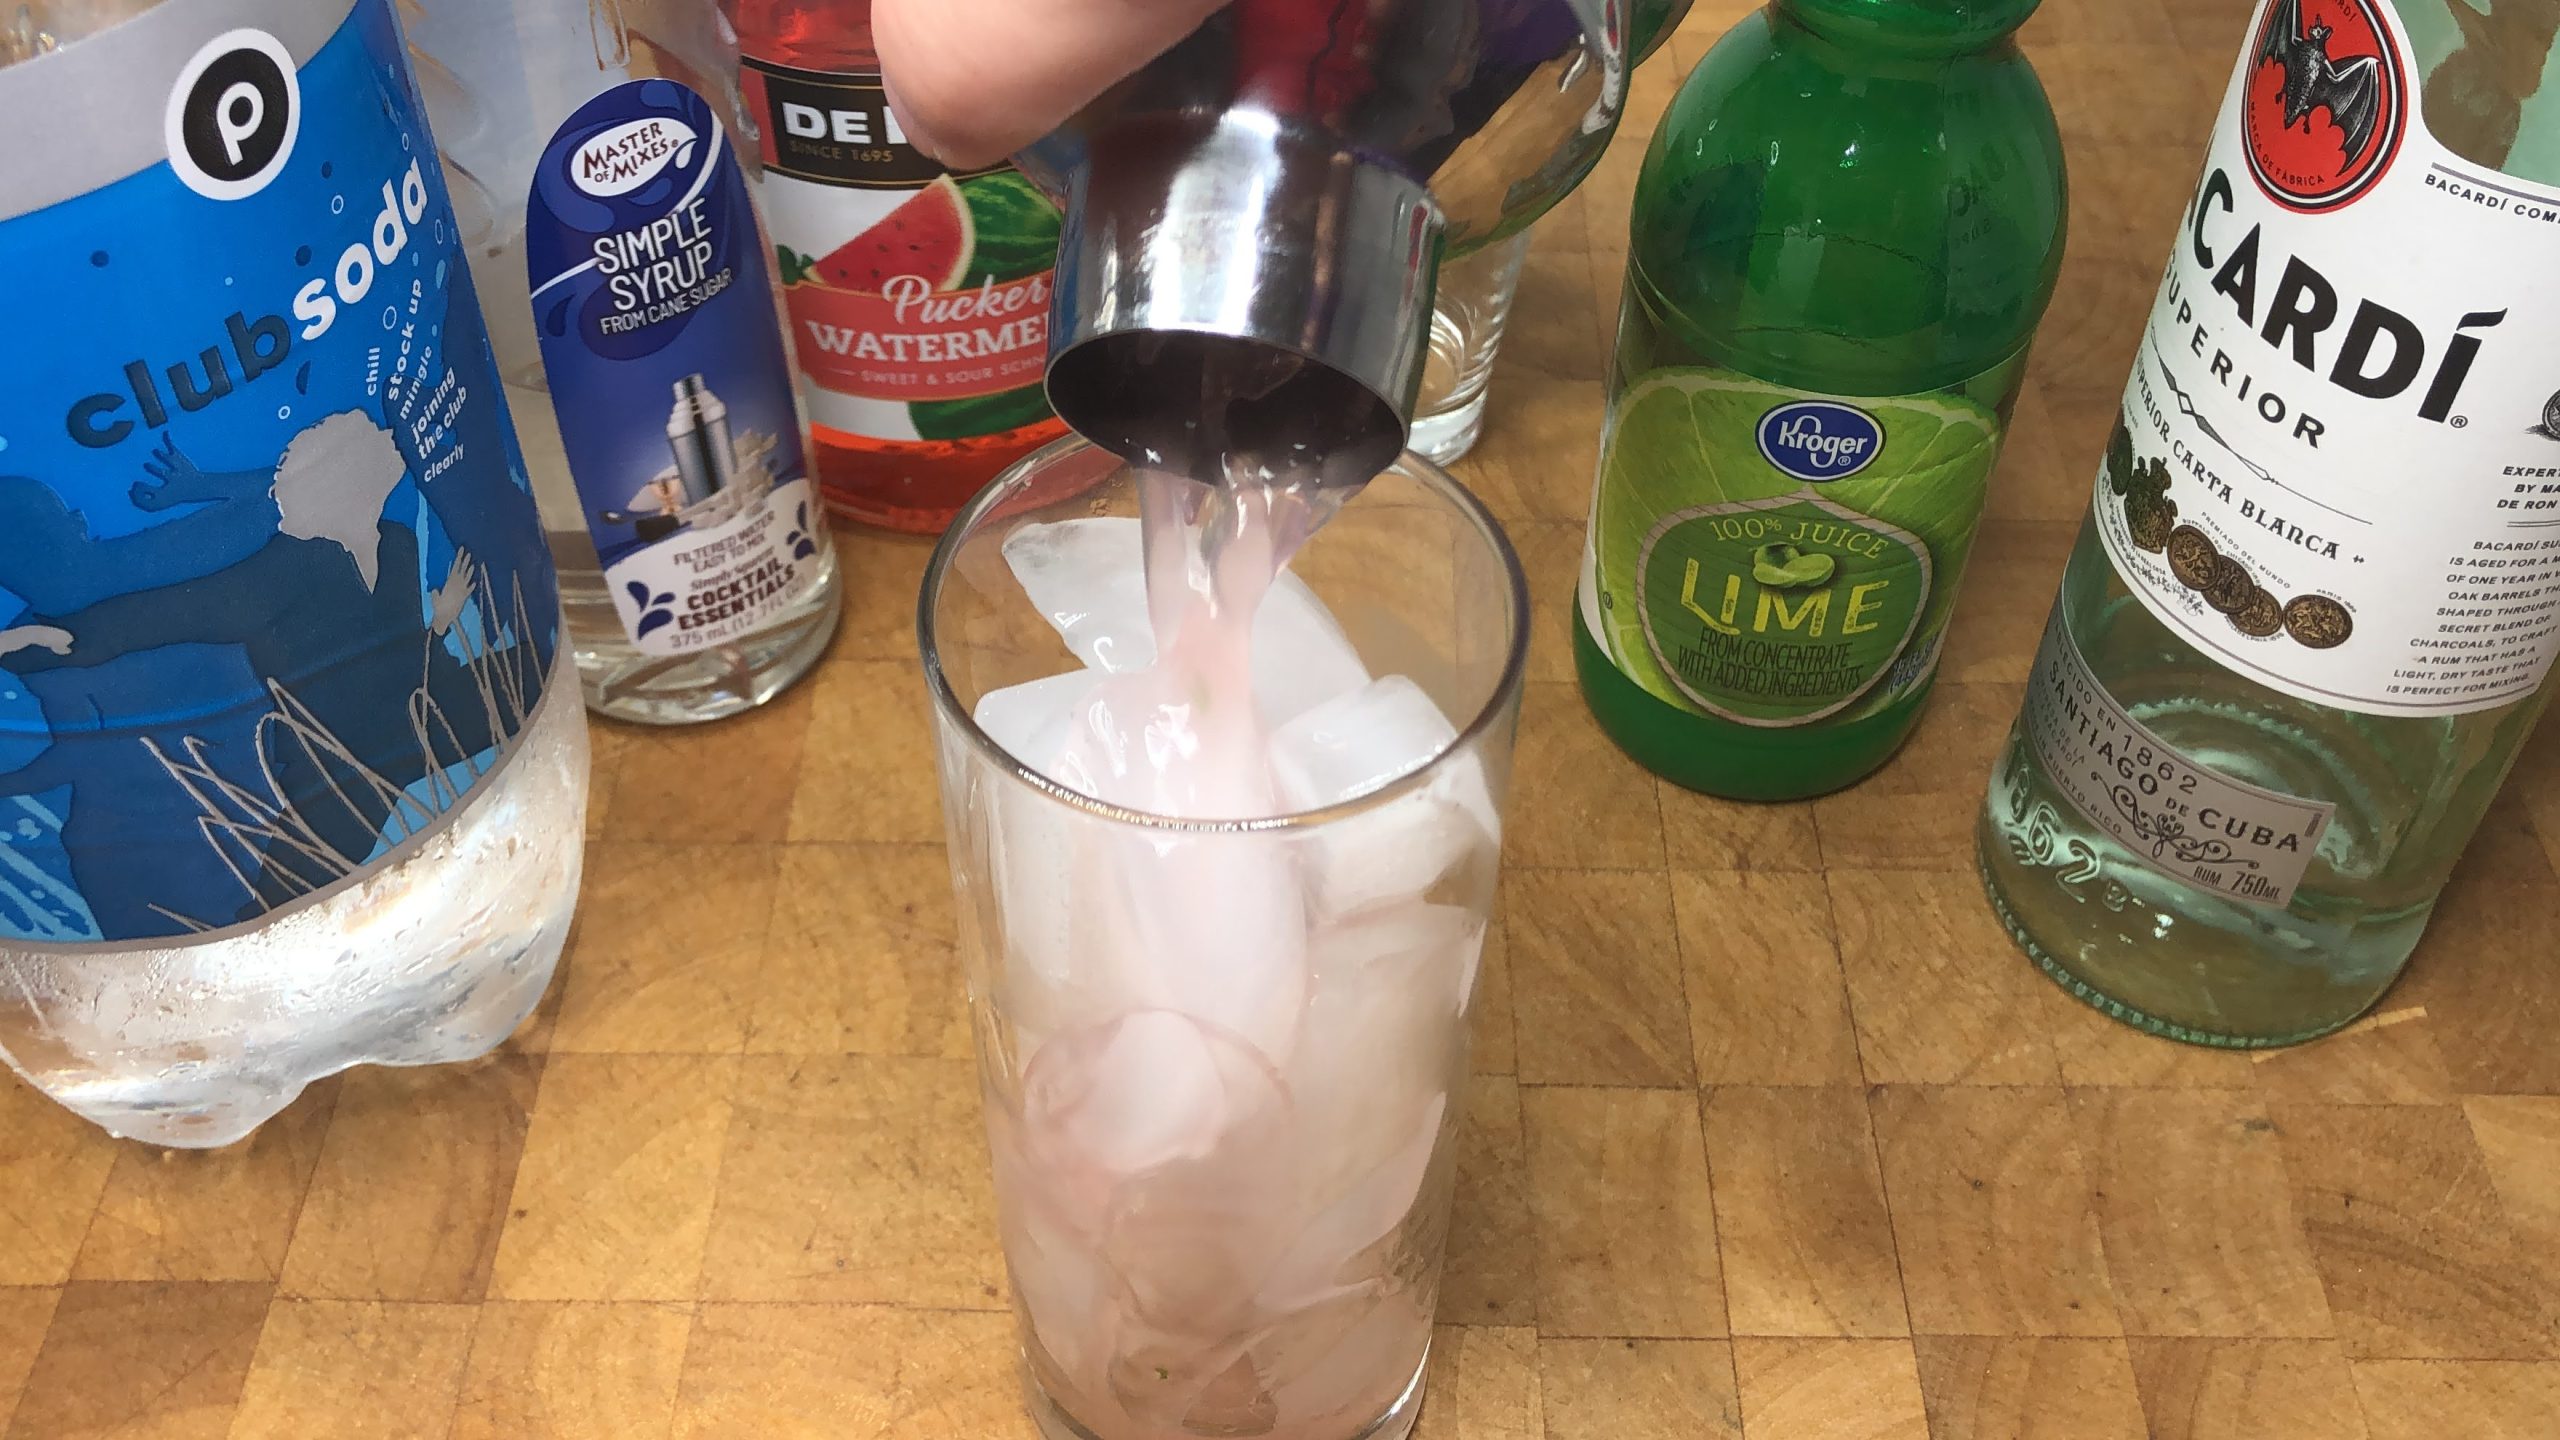 Pouring drink from shaker into glass.